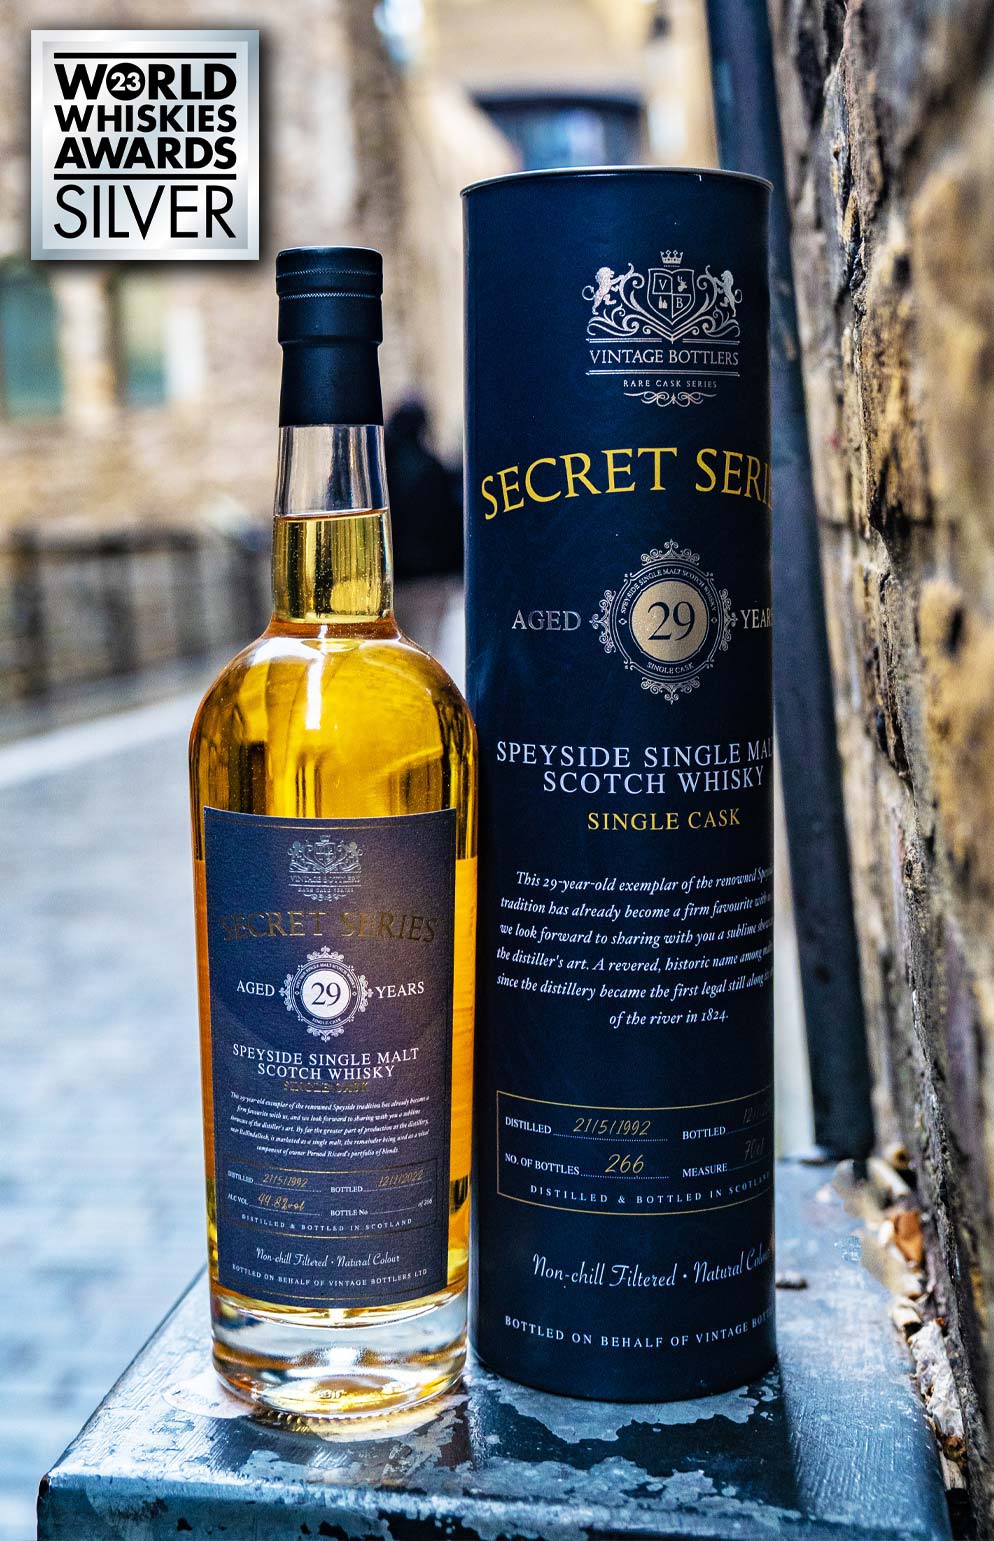 The Secret Series no.2 - 29 Year Old